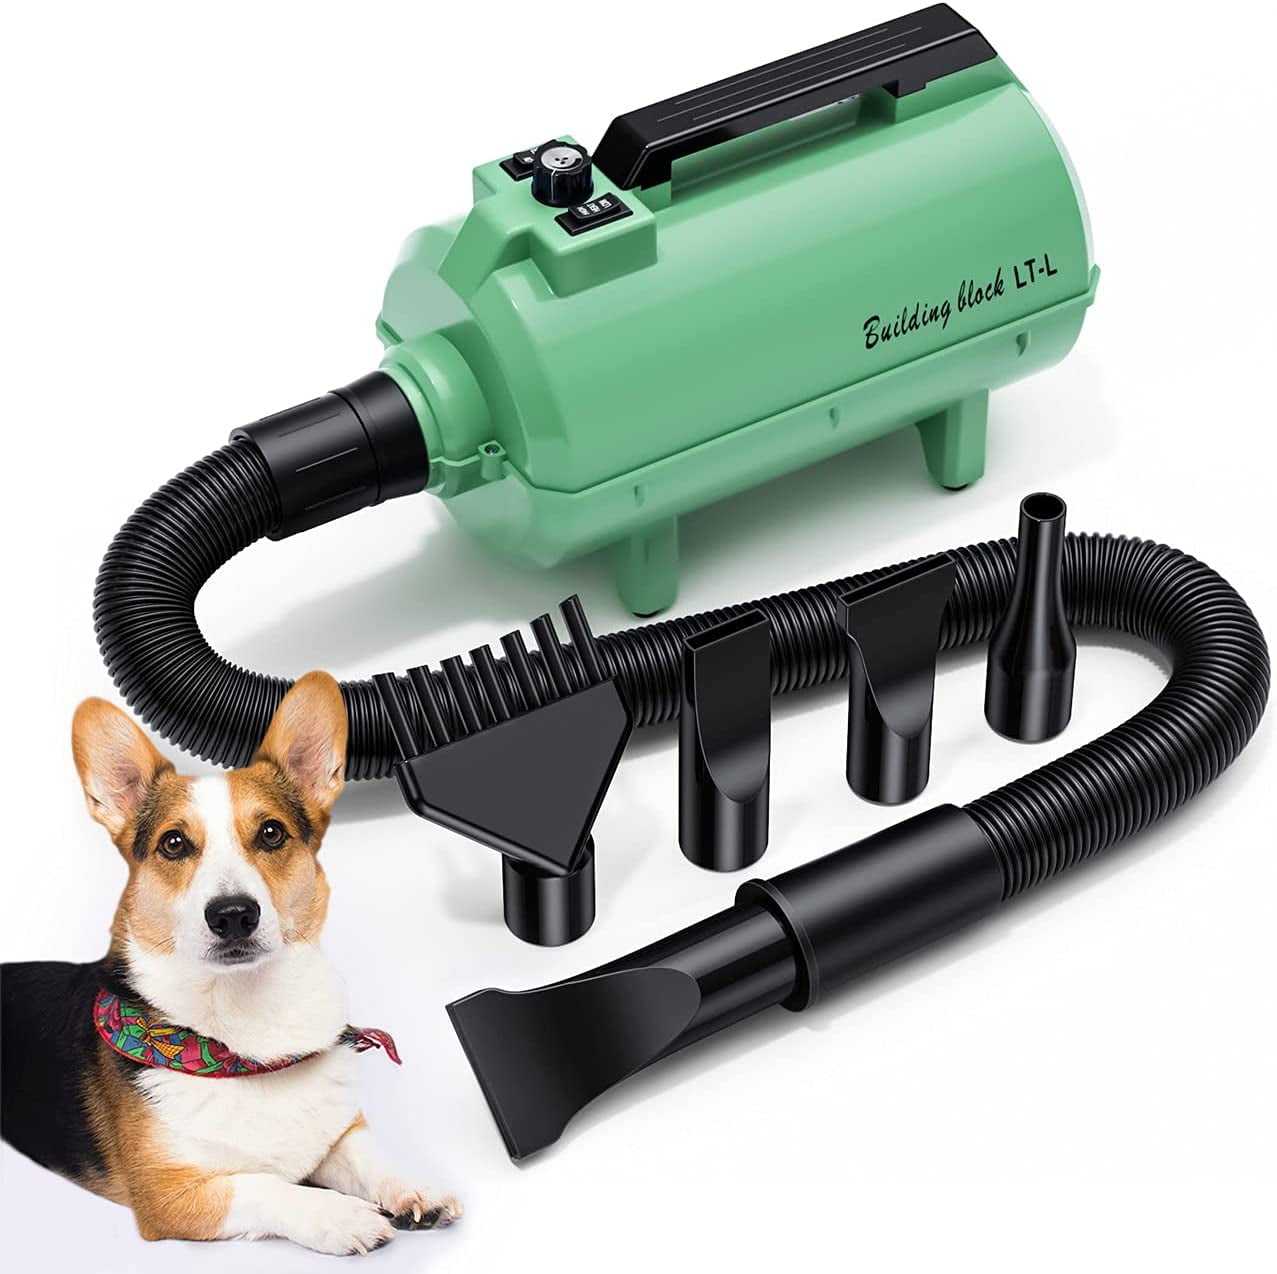 NESTROAD Dog Dryer High Velocity Dog Hair Dryer,4.3HP/3200W Dog Blower Grooming Force Dryer with Stepless Adjustable Speed,Professional Pet Hair Drying with 4 Different Nozzles for Dogs Pets 